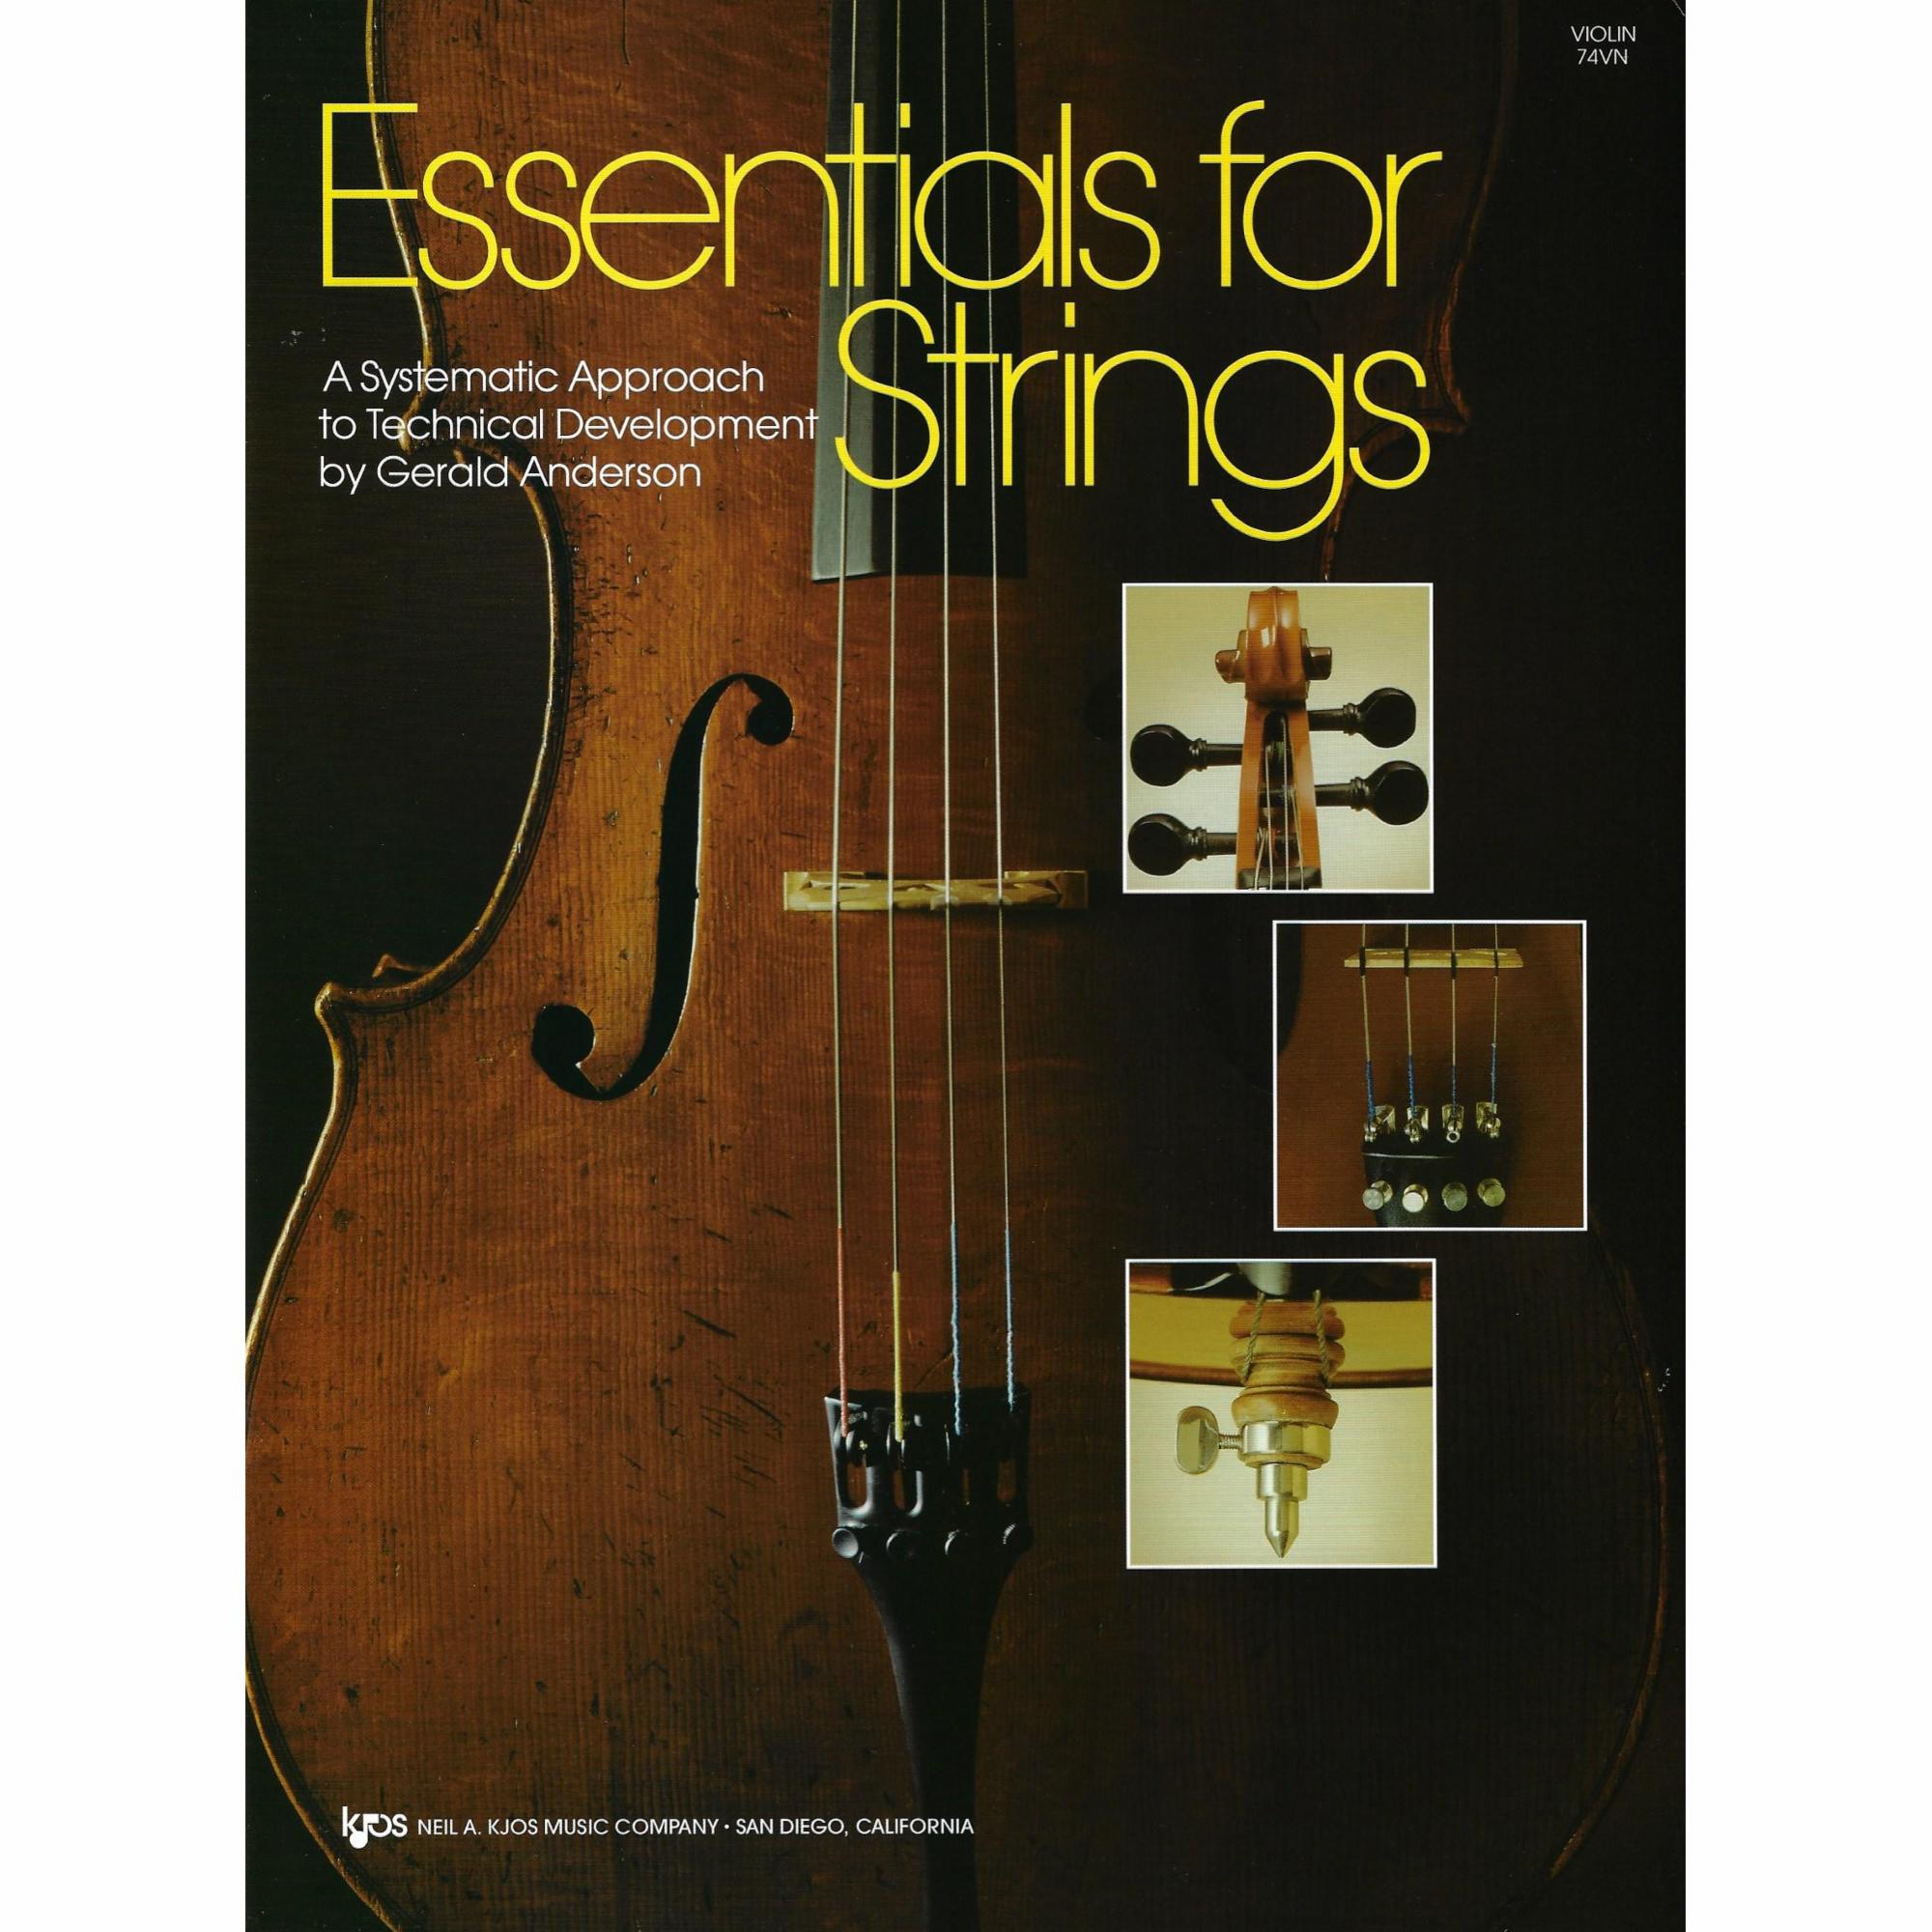 Essentials for Strings